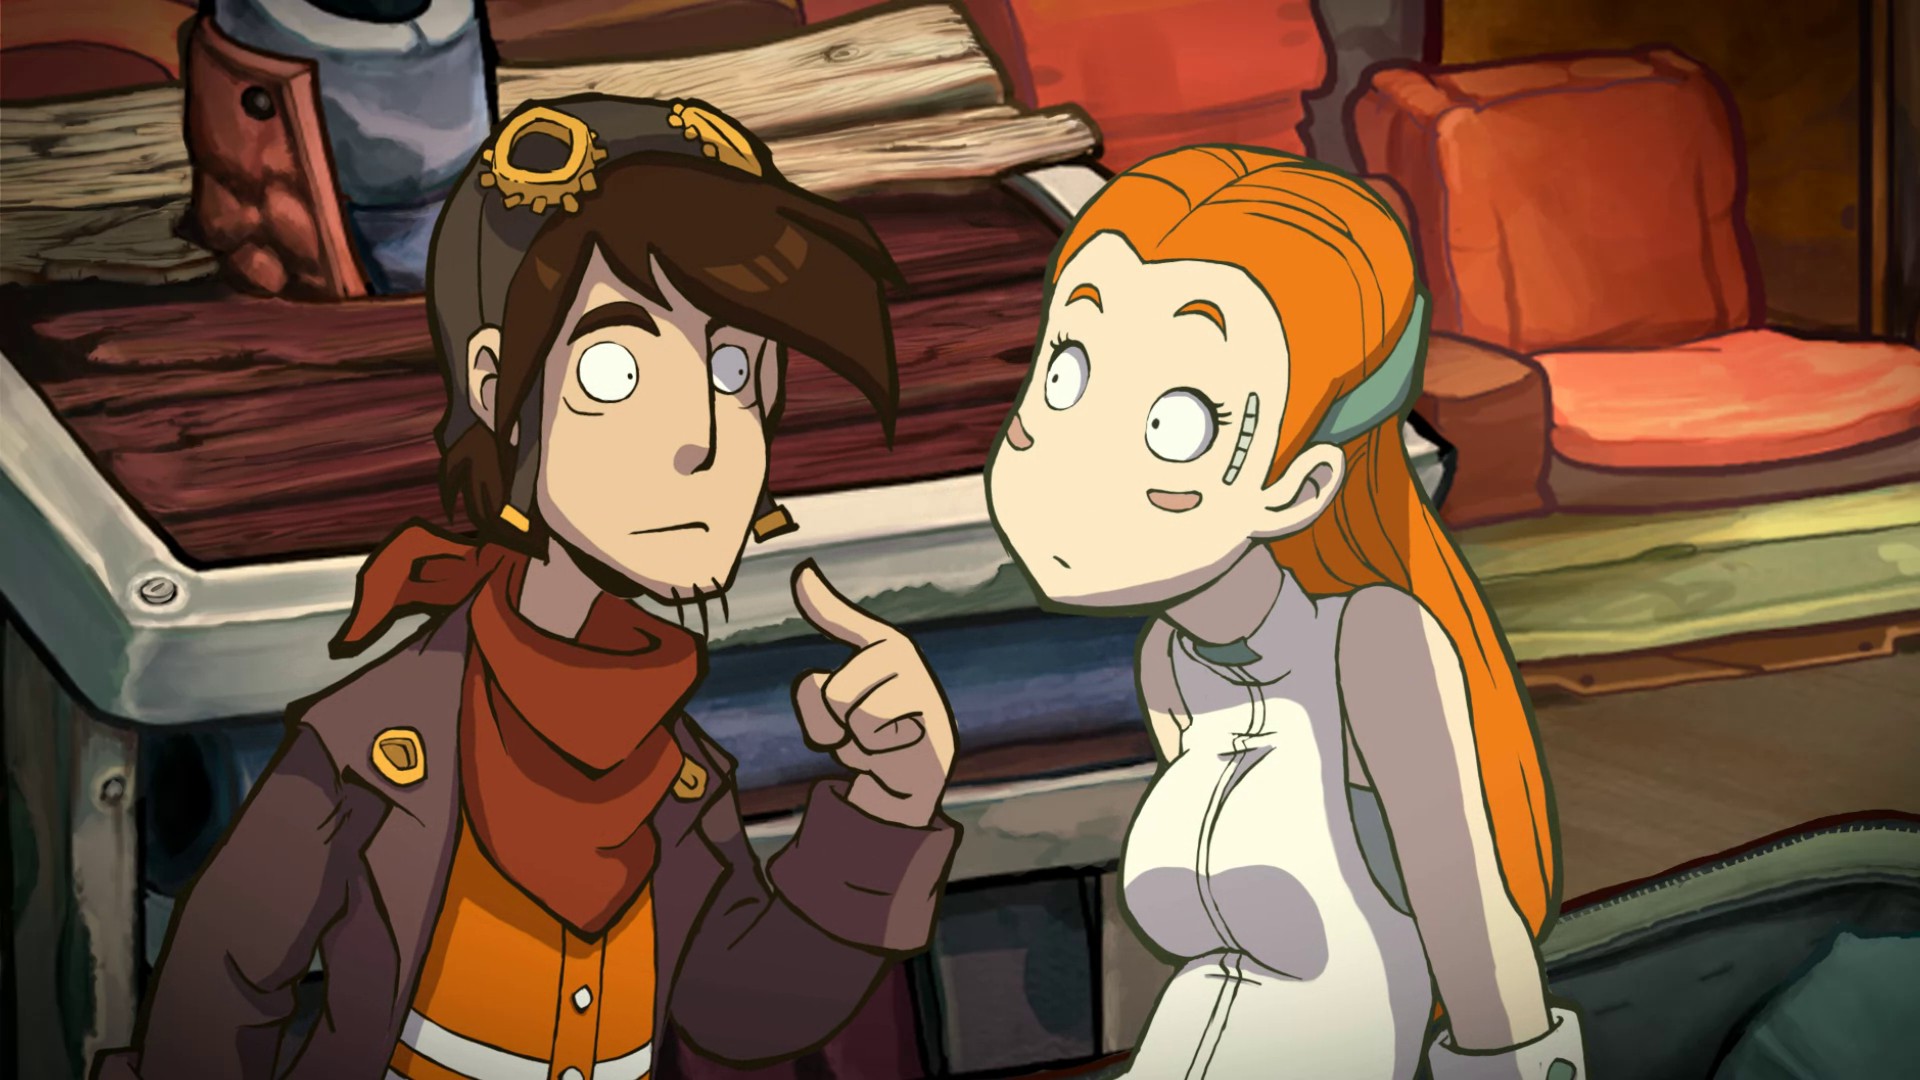 deponia-review-02